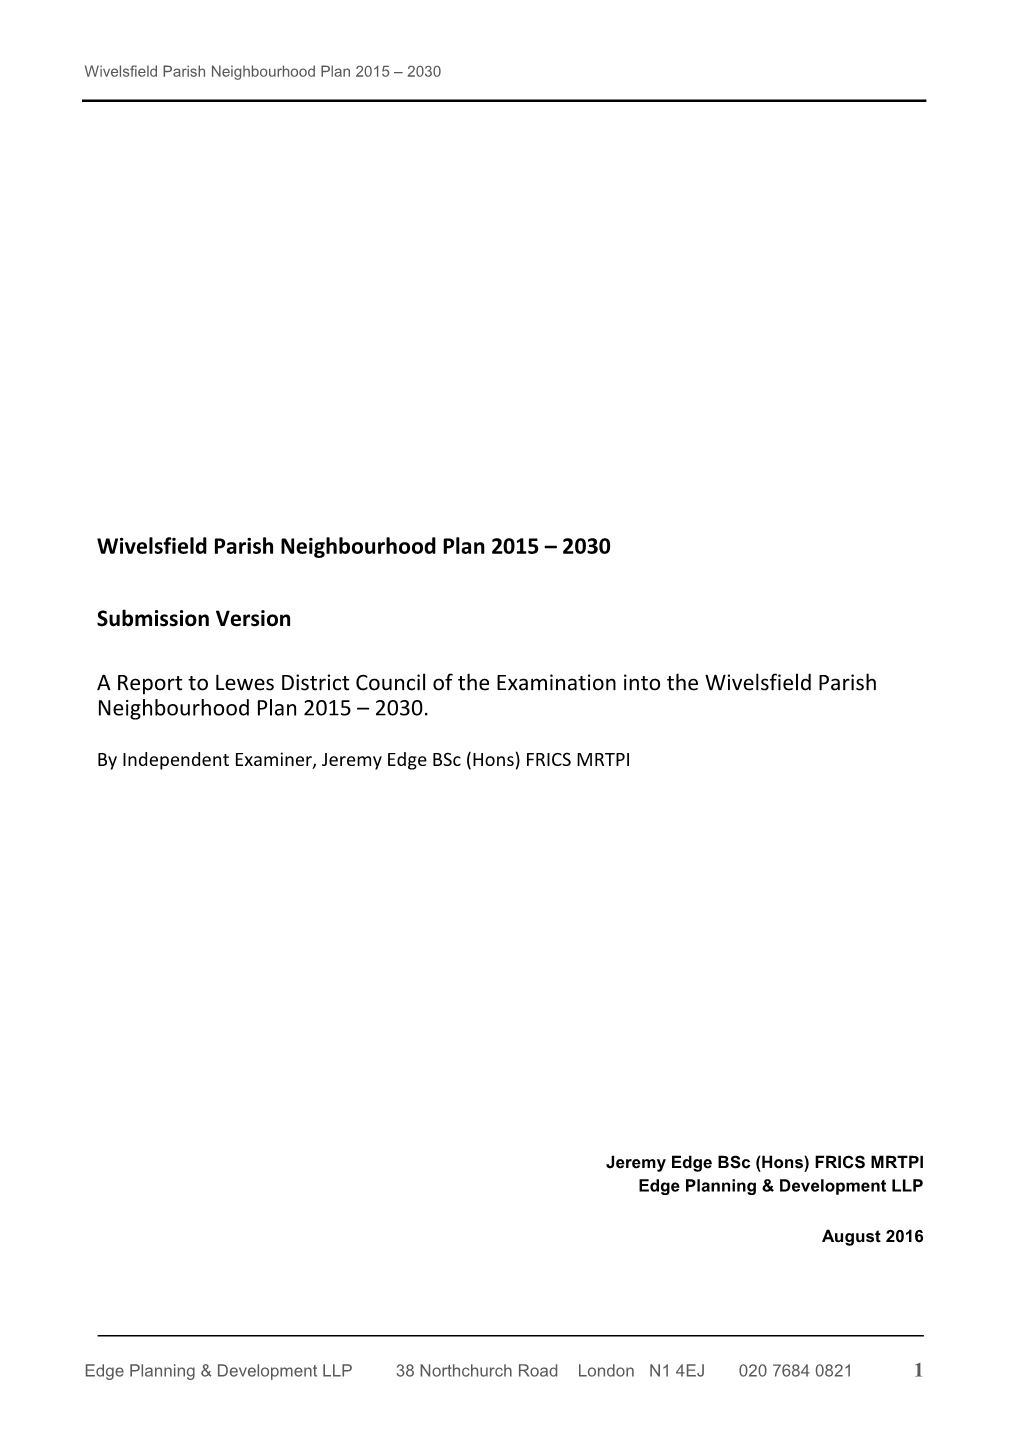 Wivelsfield Parish Neighbourhood Plan 2015 – 2030 Submission Version a Report to Lewes District Council of the Examination